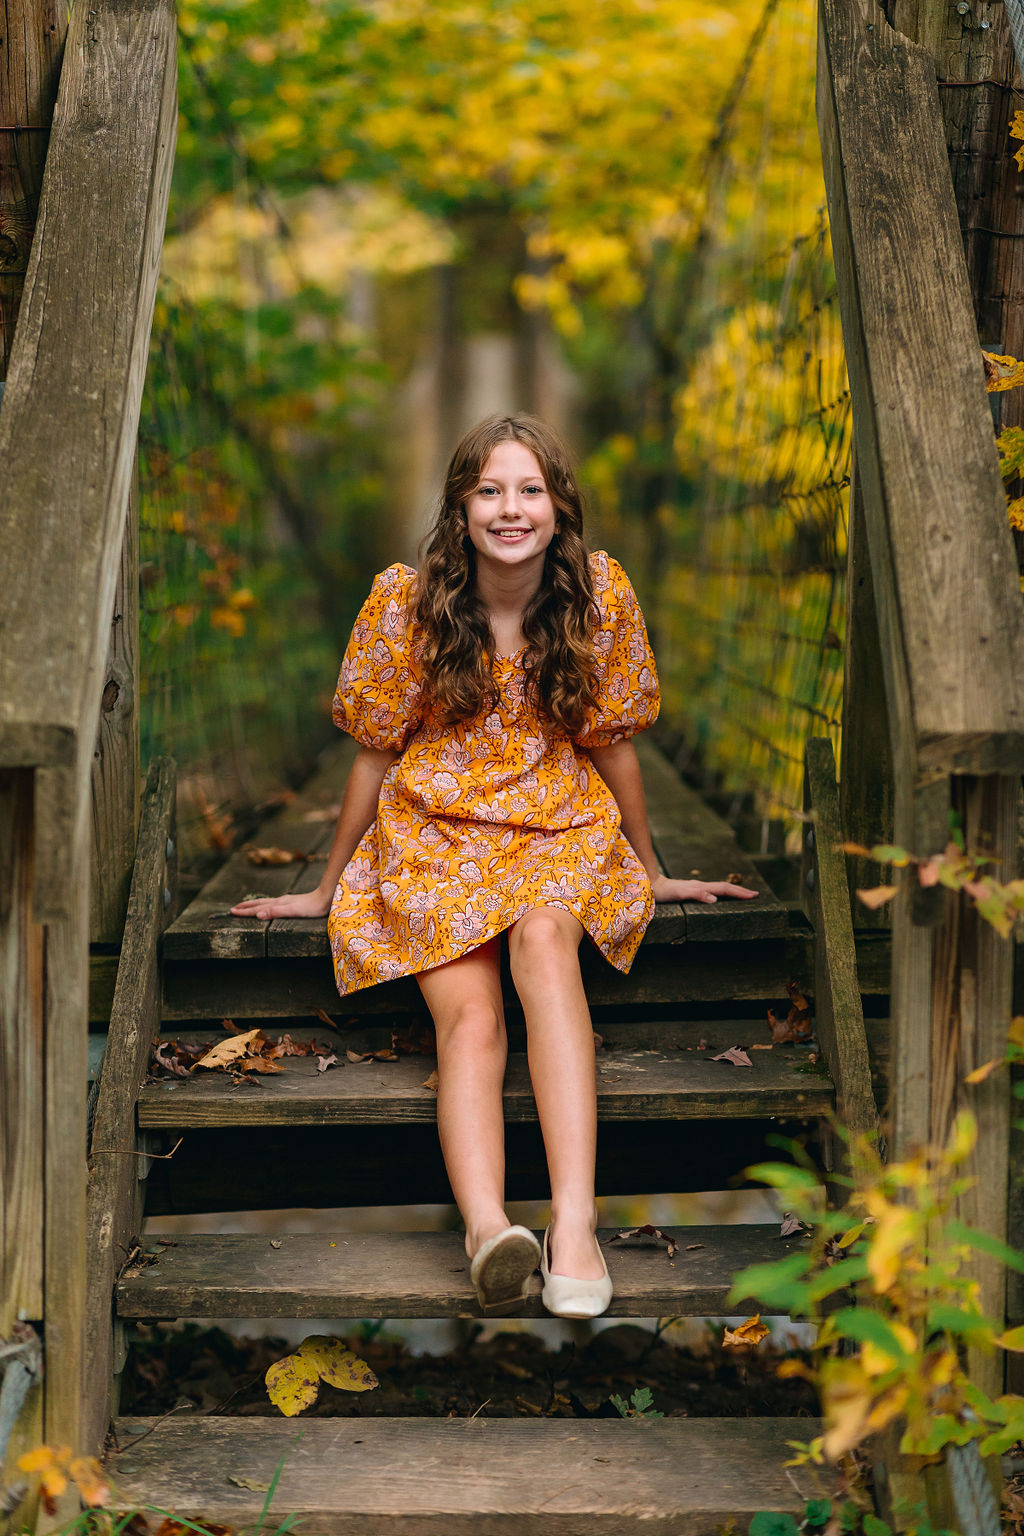 A young girl sits on the steps of a narrow wooden bridge in the woods in fall in an orange floral dress